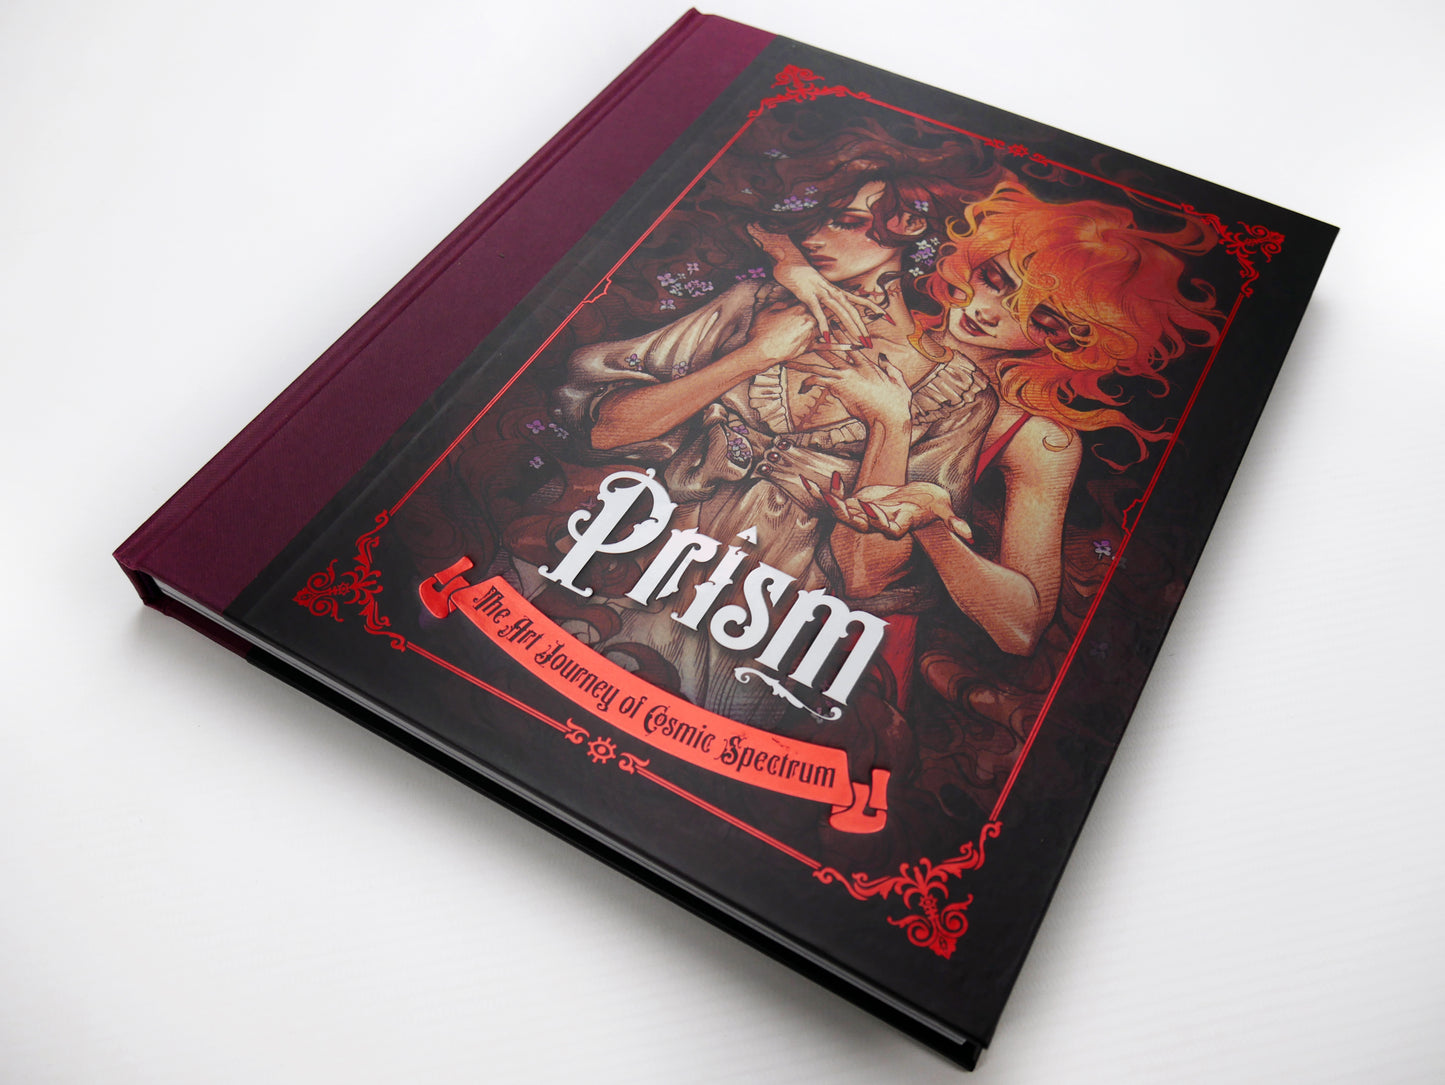 PRISM The art journey of Cosmic Spectrum - special edition